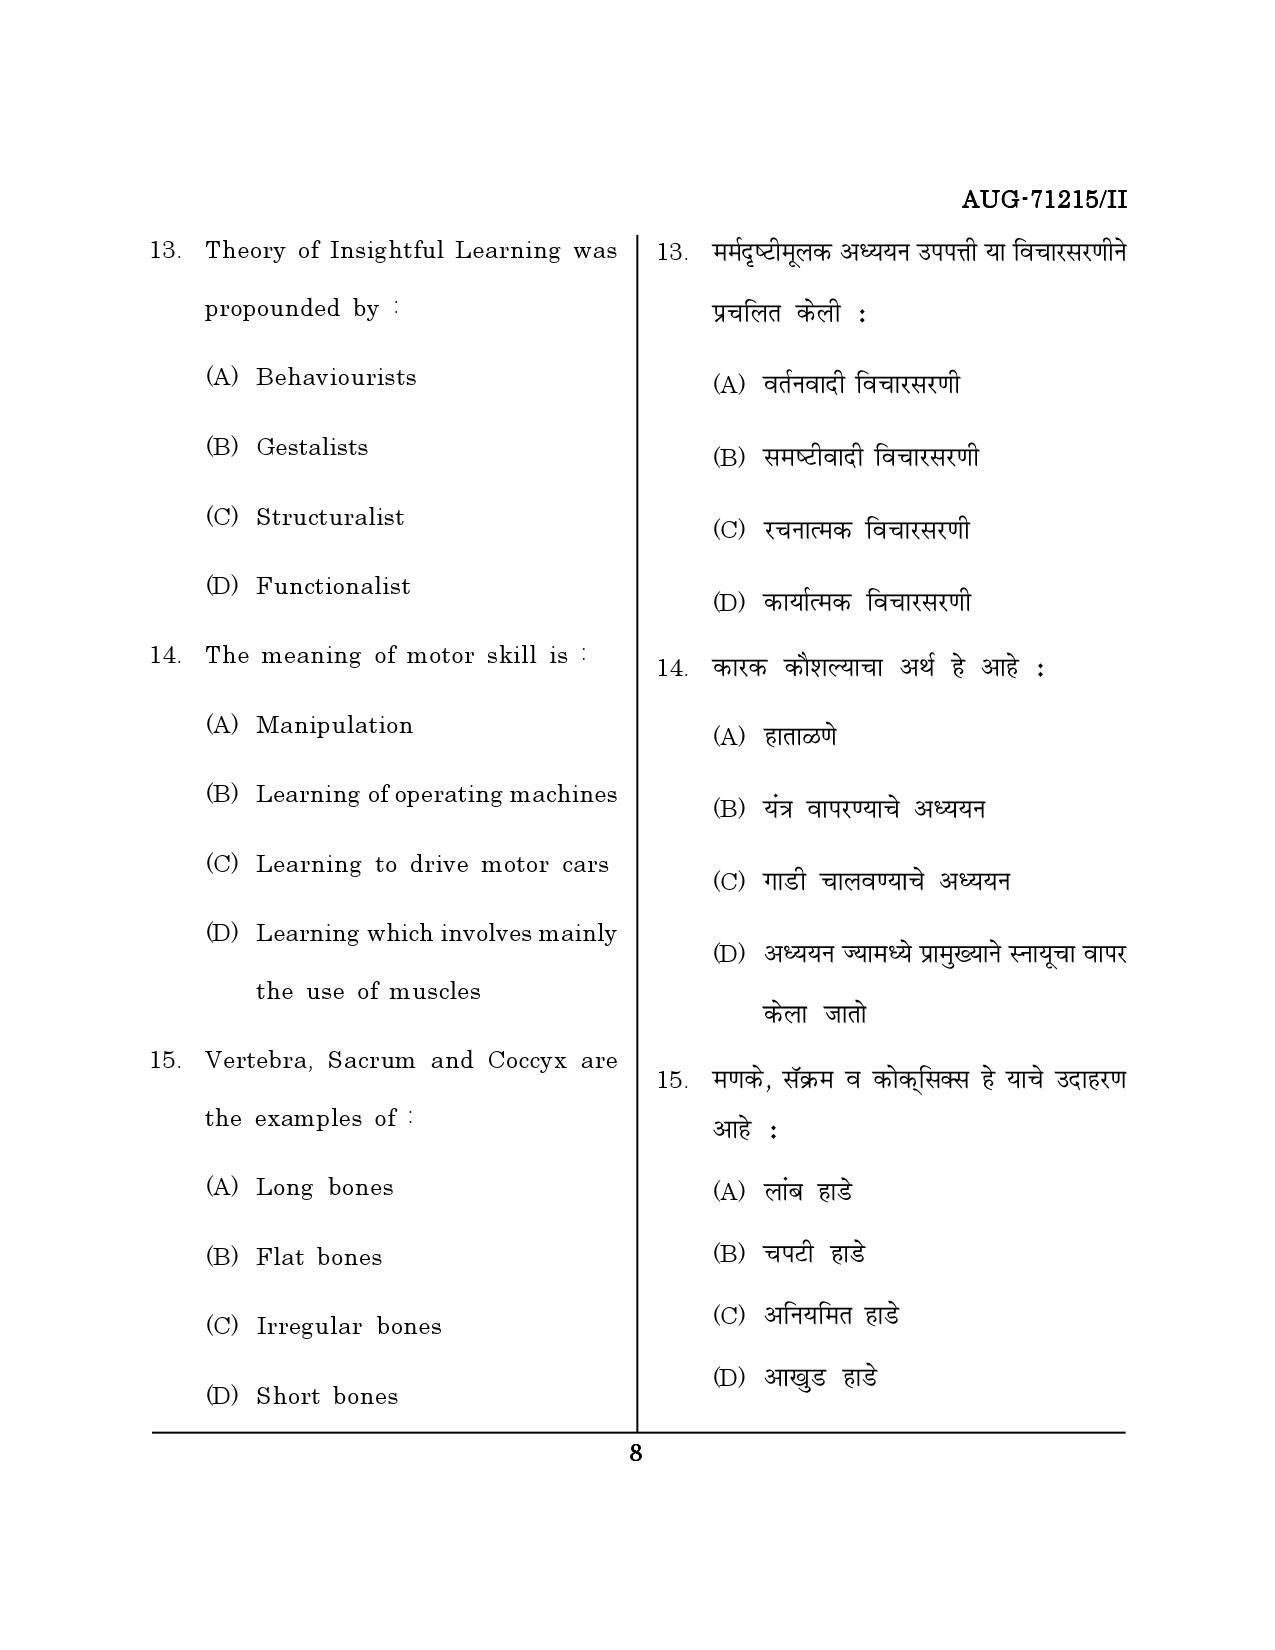 Maharashtra SET Physical Education Question Paper II August 2015 7